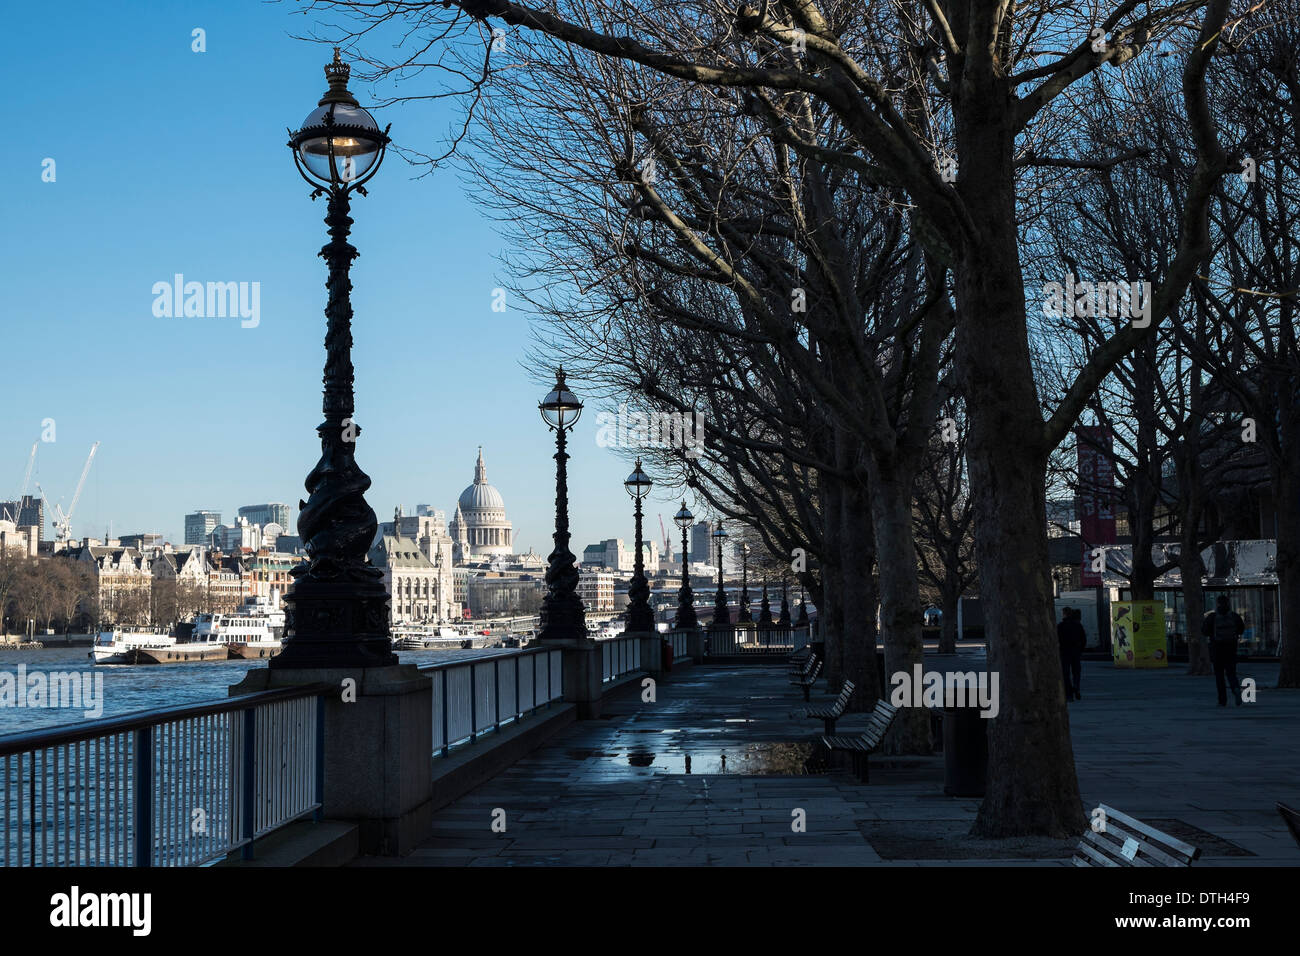 An early morning view looking down the Embankment, which is in shadow, towards St Paul's Cathedral which is in sunlight. Stock Photo